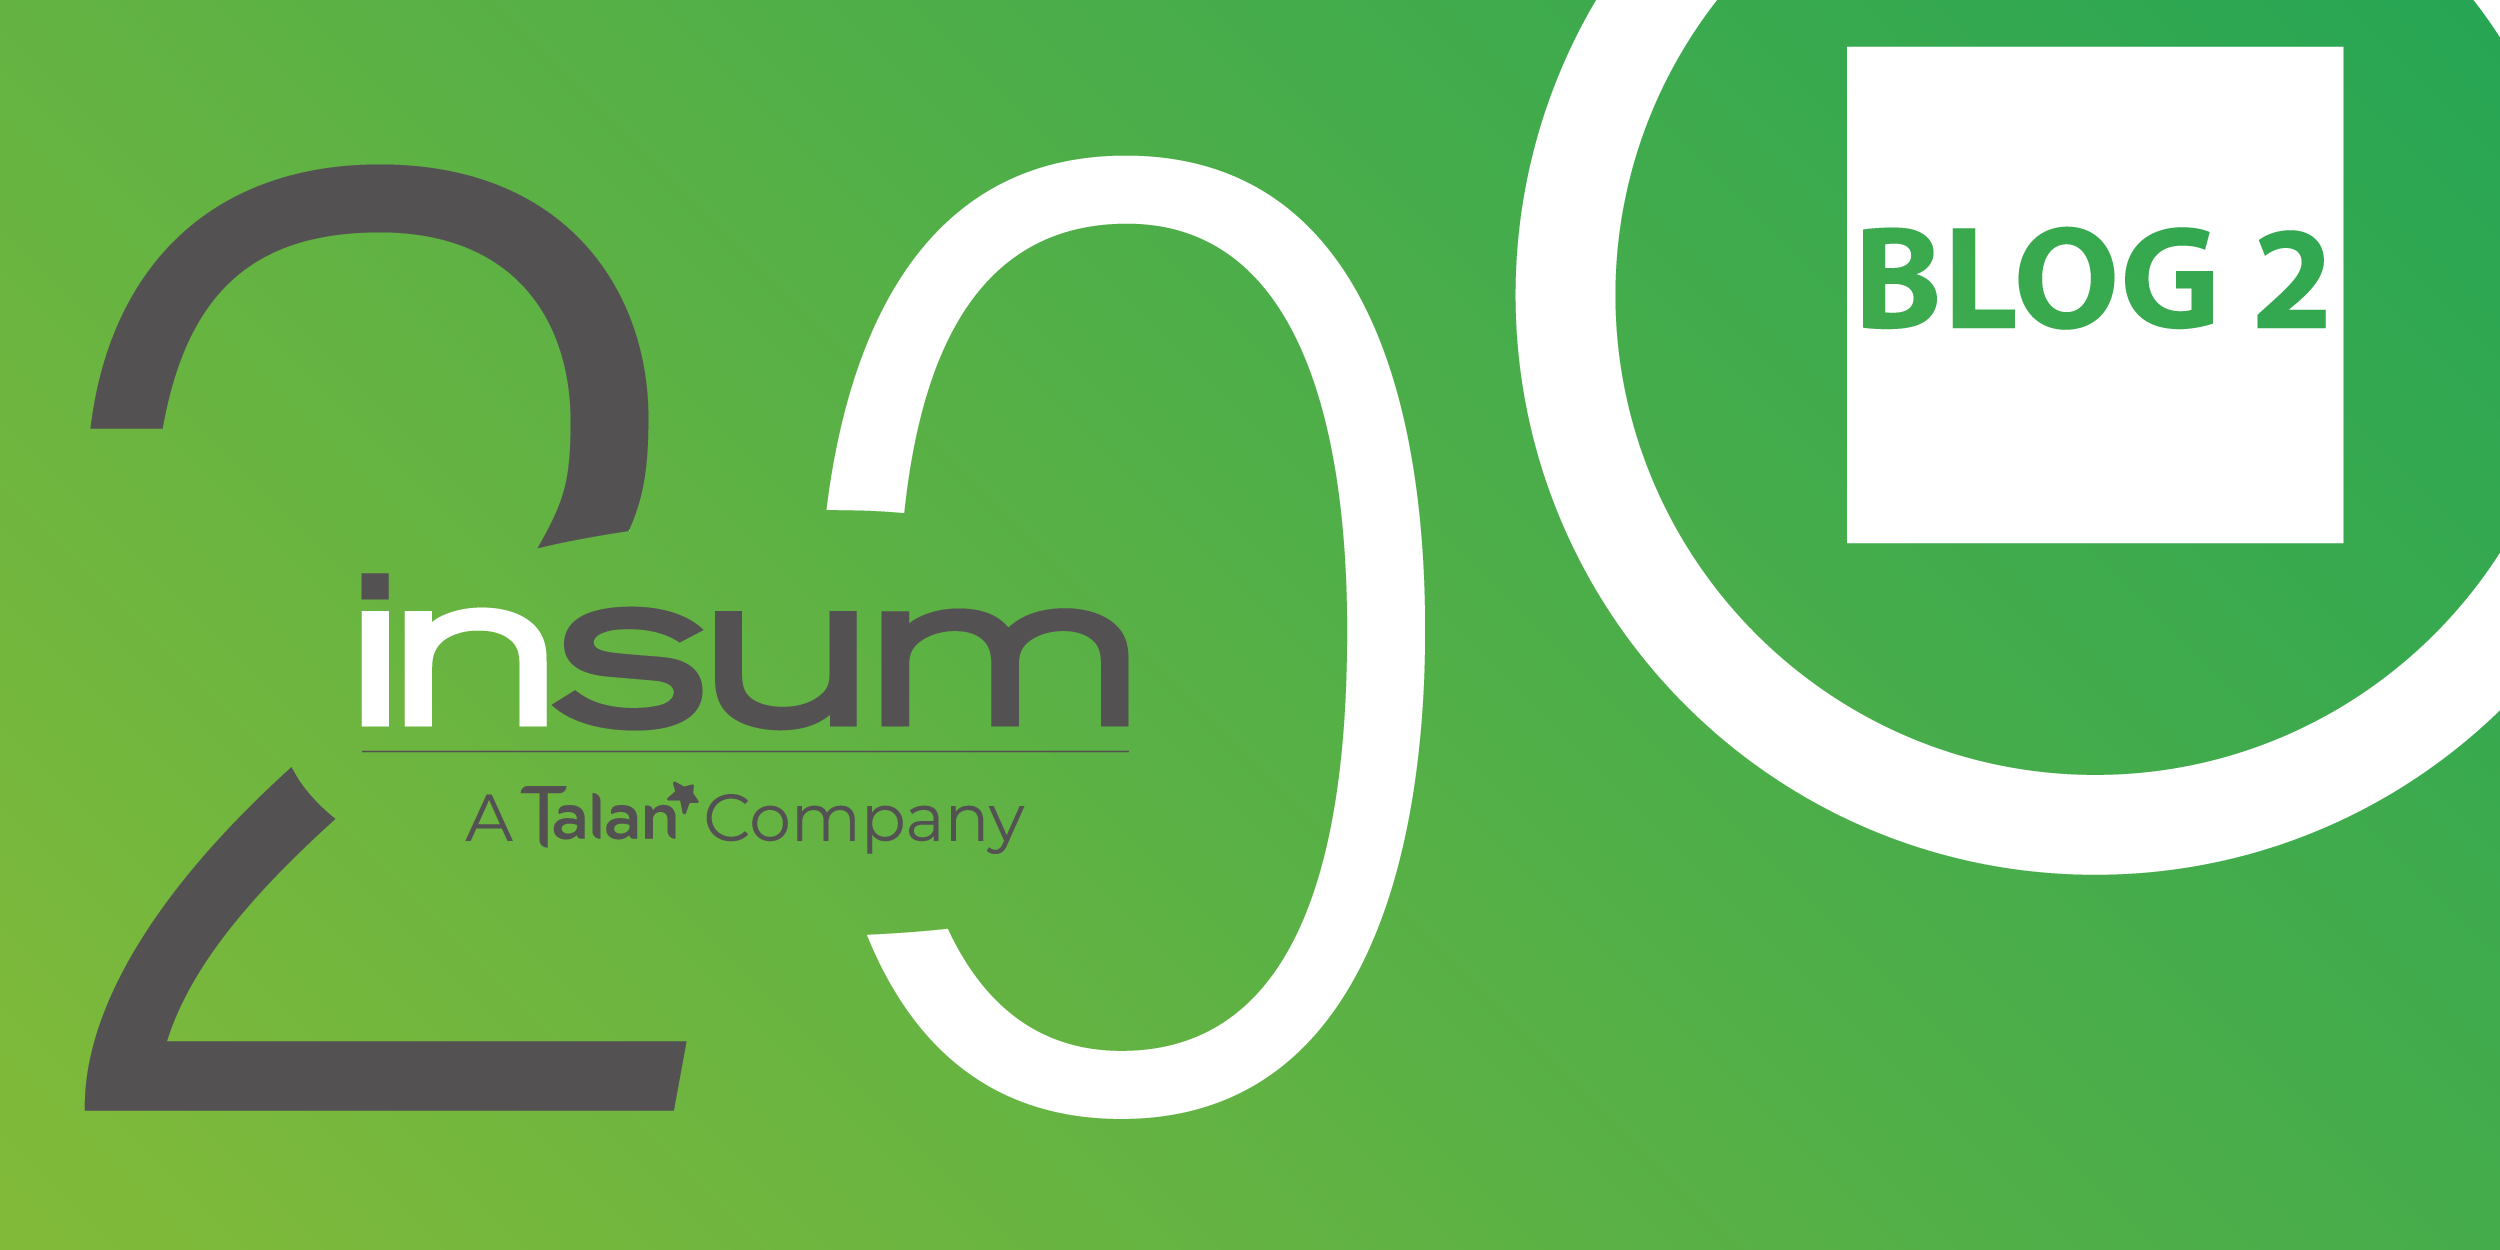 The Journey to APEX – 20 Years of Insum